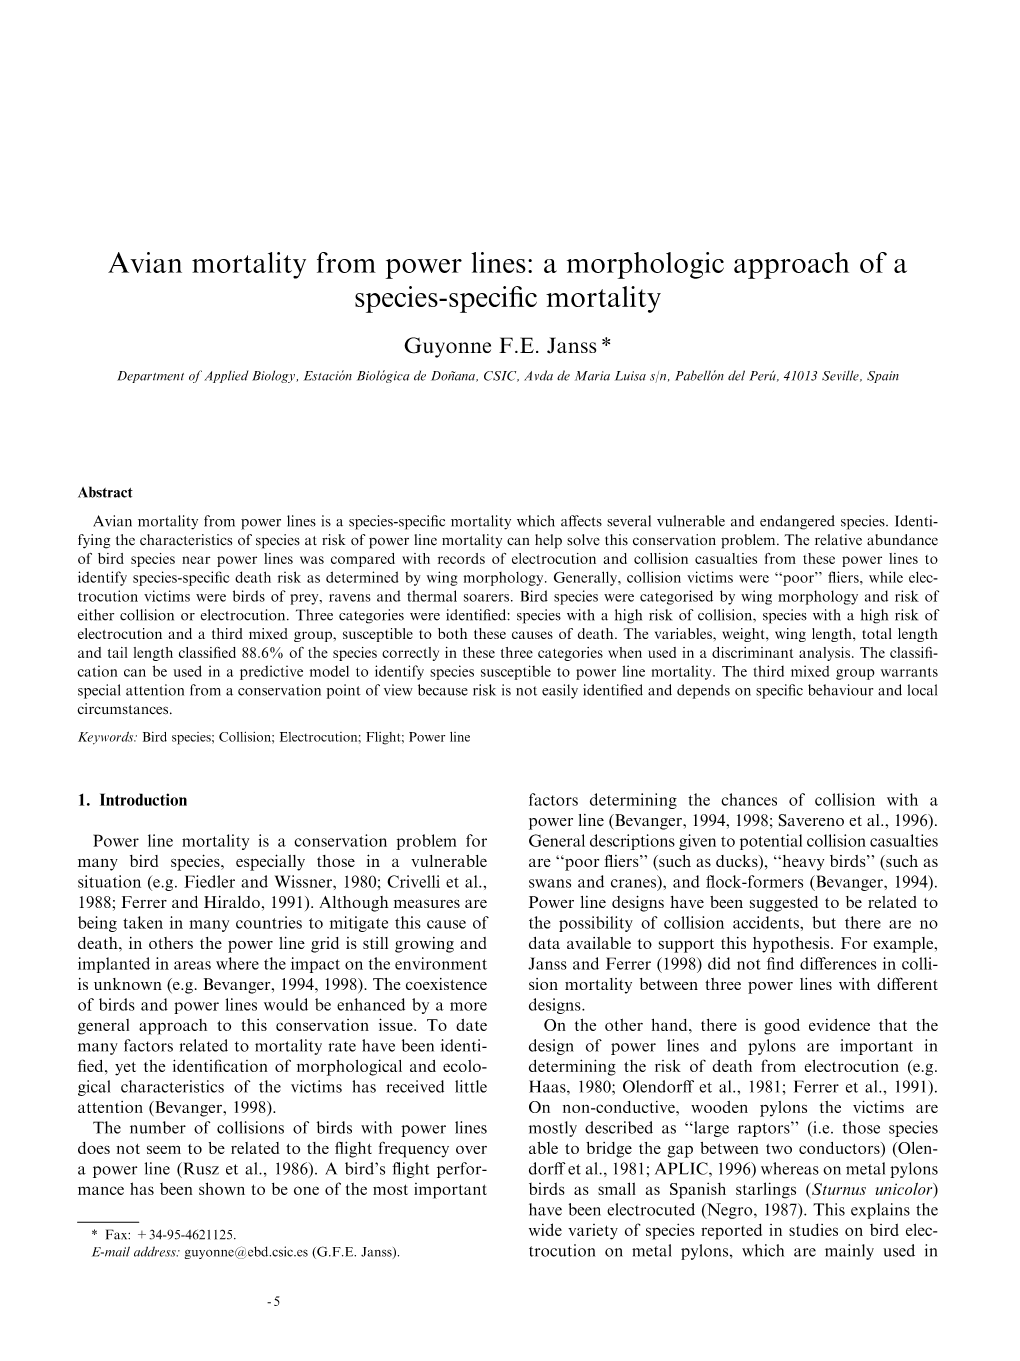 A Morphologic Approach of a Species-Specific Mortality